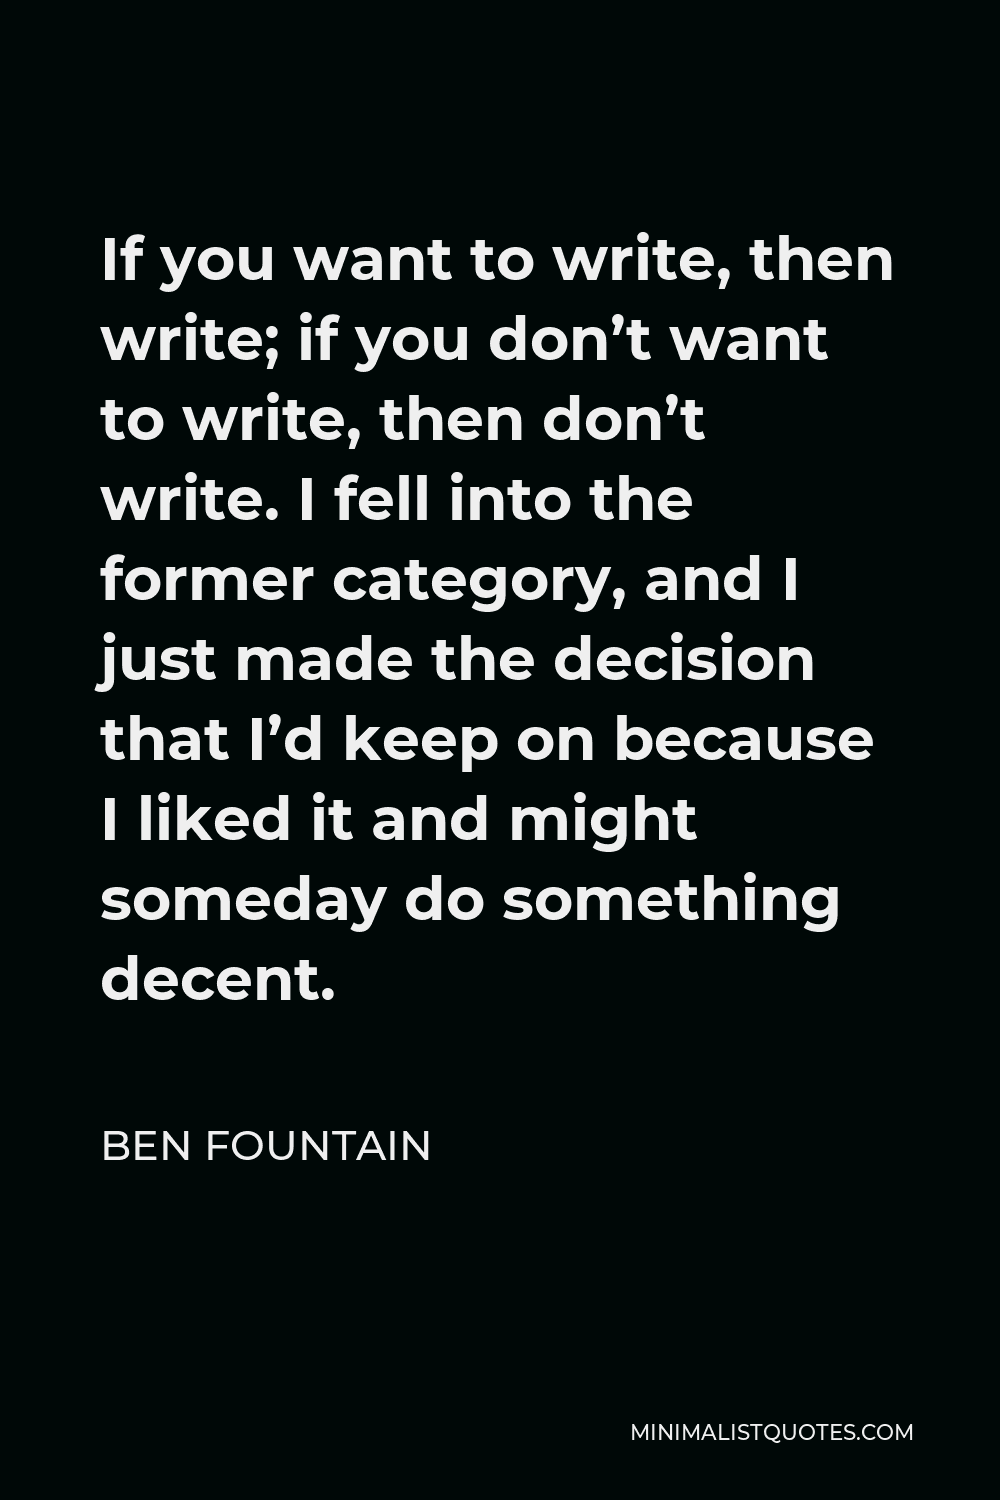 Ben Fountain Quote - If you want to write, then write; if you don’t want to write, then don’t write. I fell into the former category, and I just made the decision that I’d keep on because I liked it and might someday do something decent.